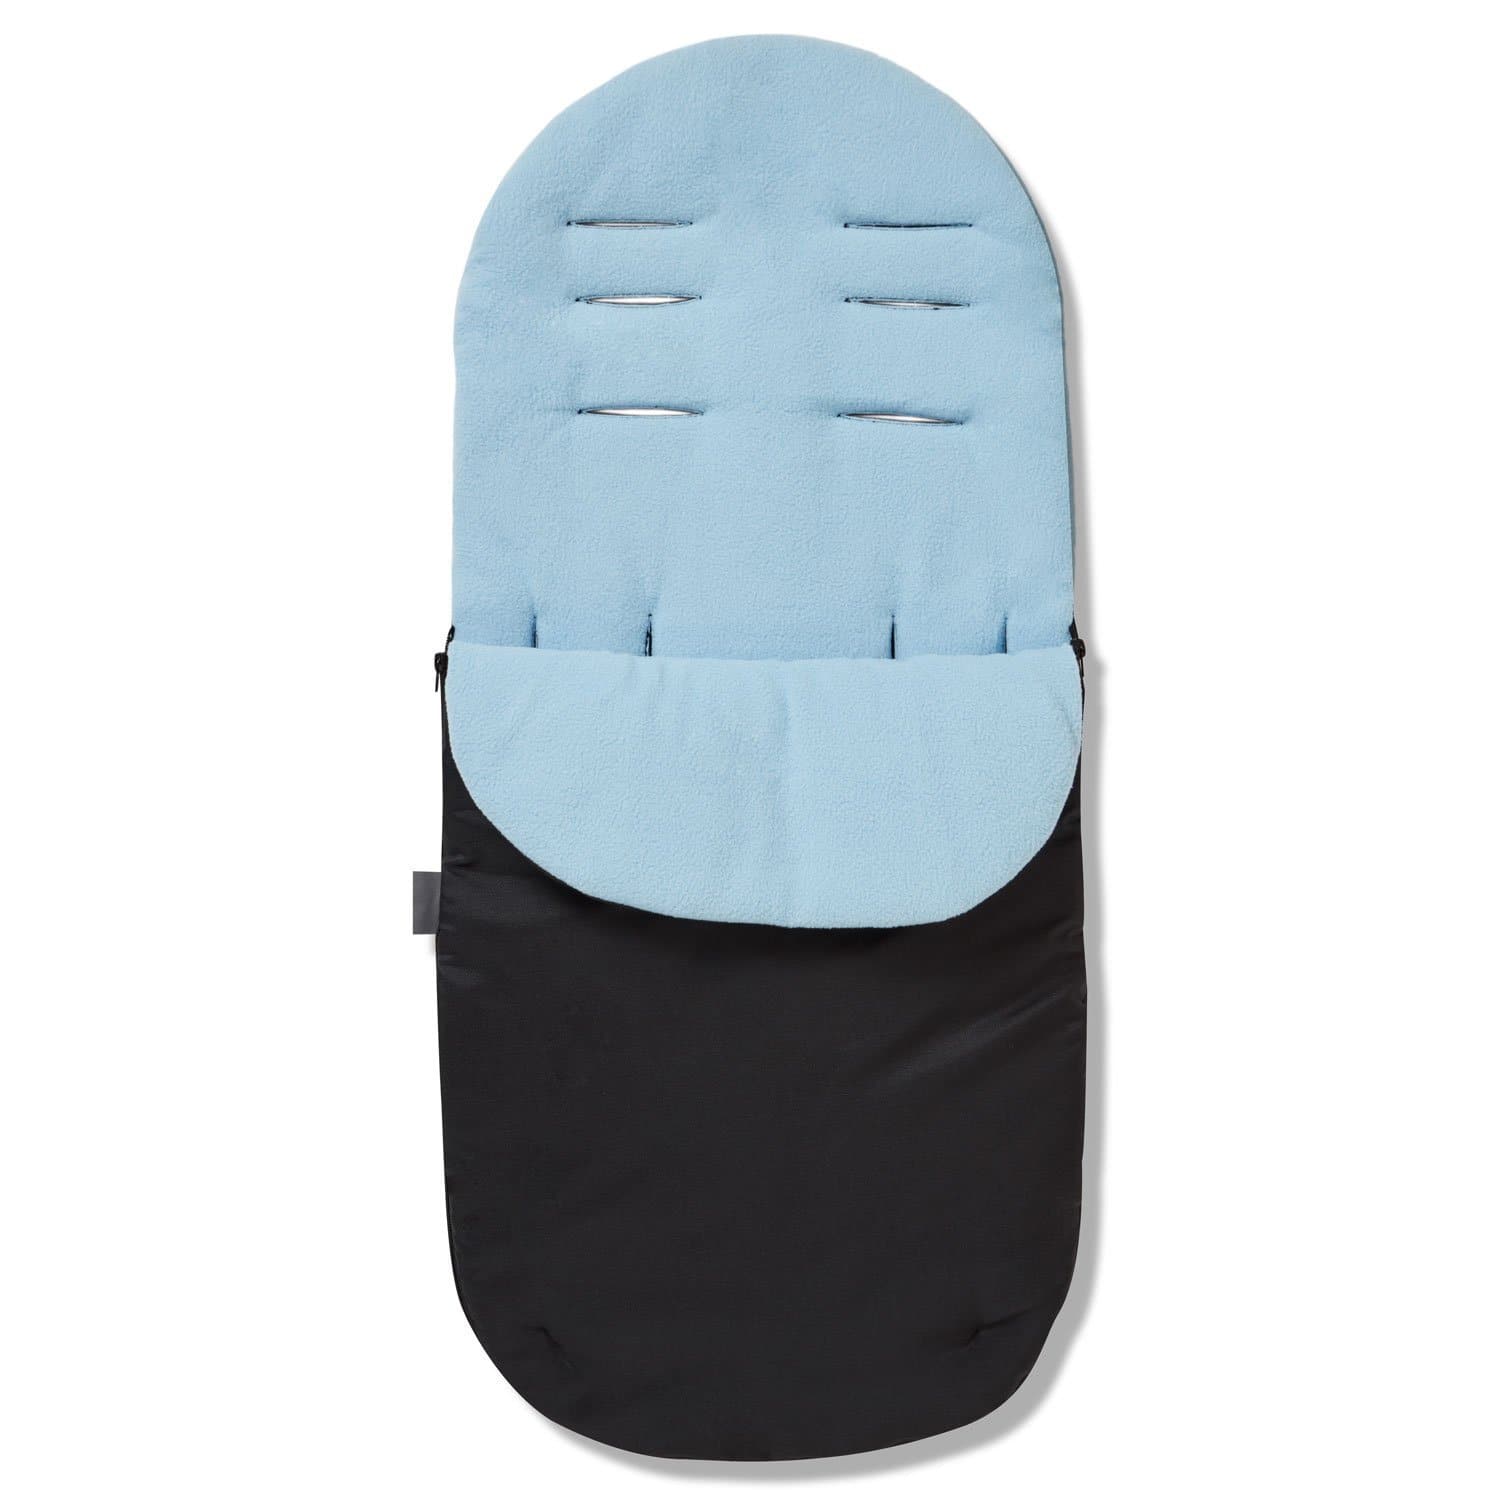 Footmuff / Cosy Toes Compatible with Kinderkraft - For Your Little One